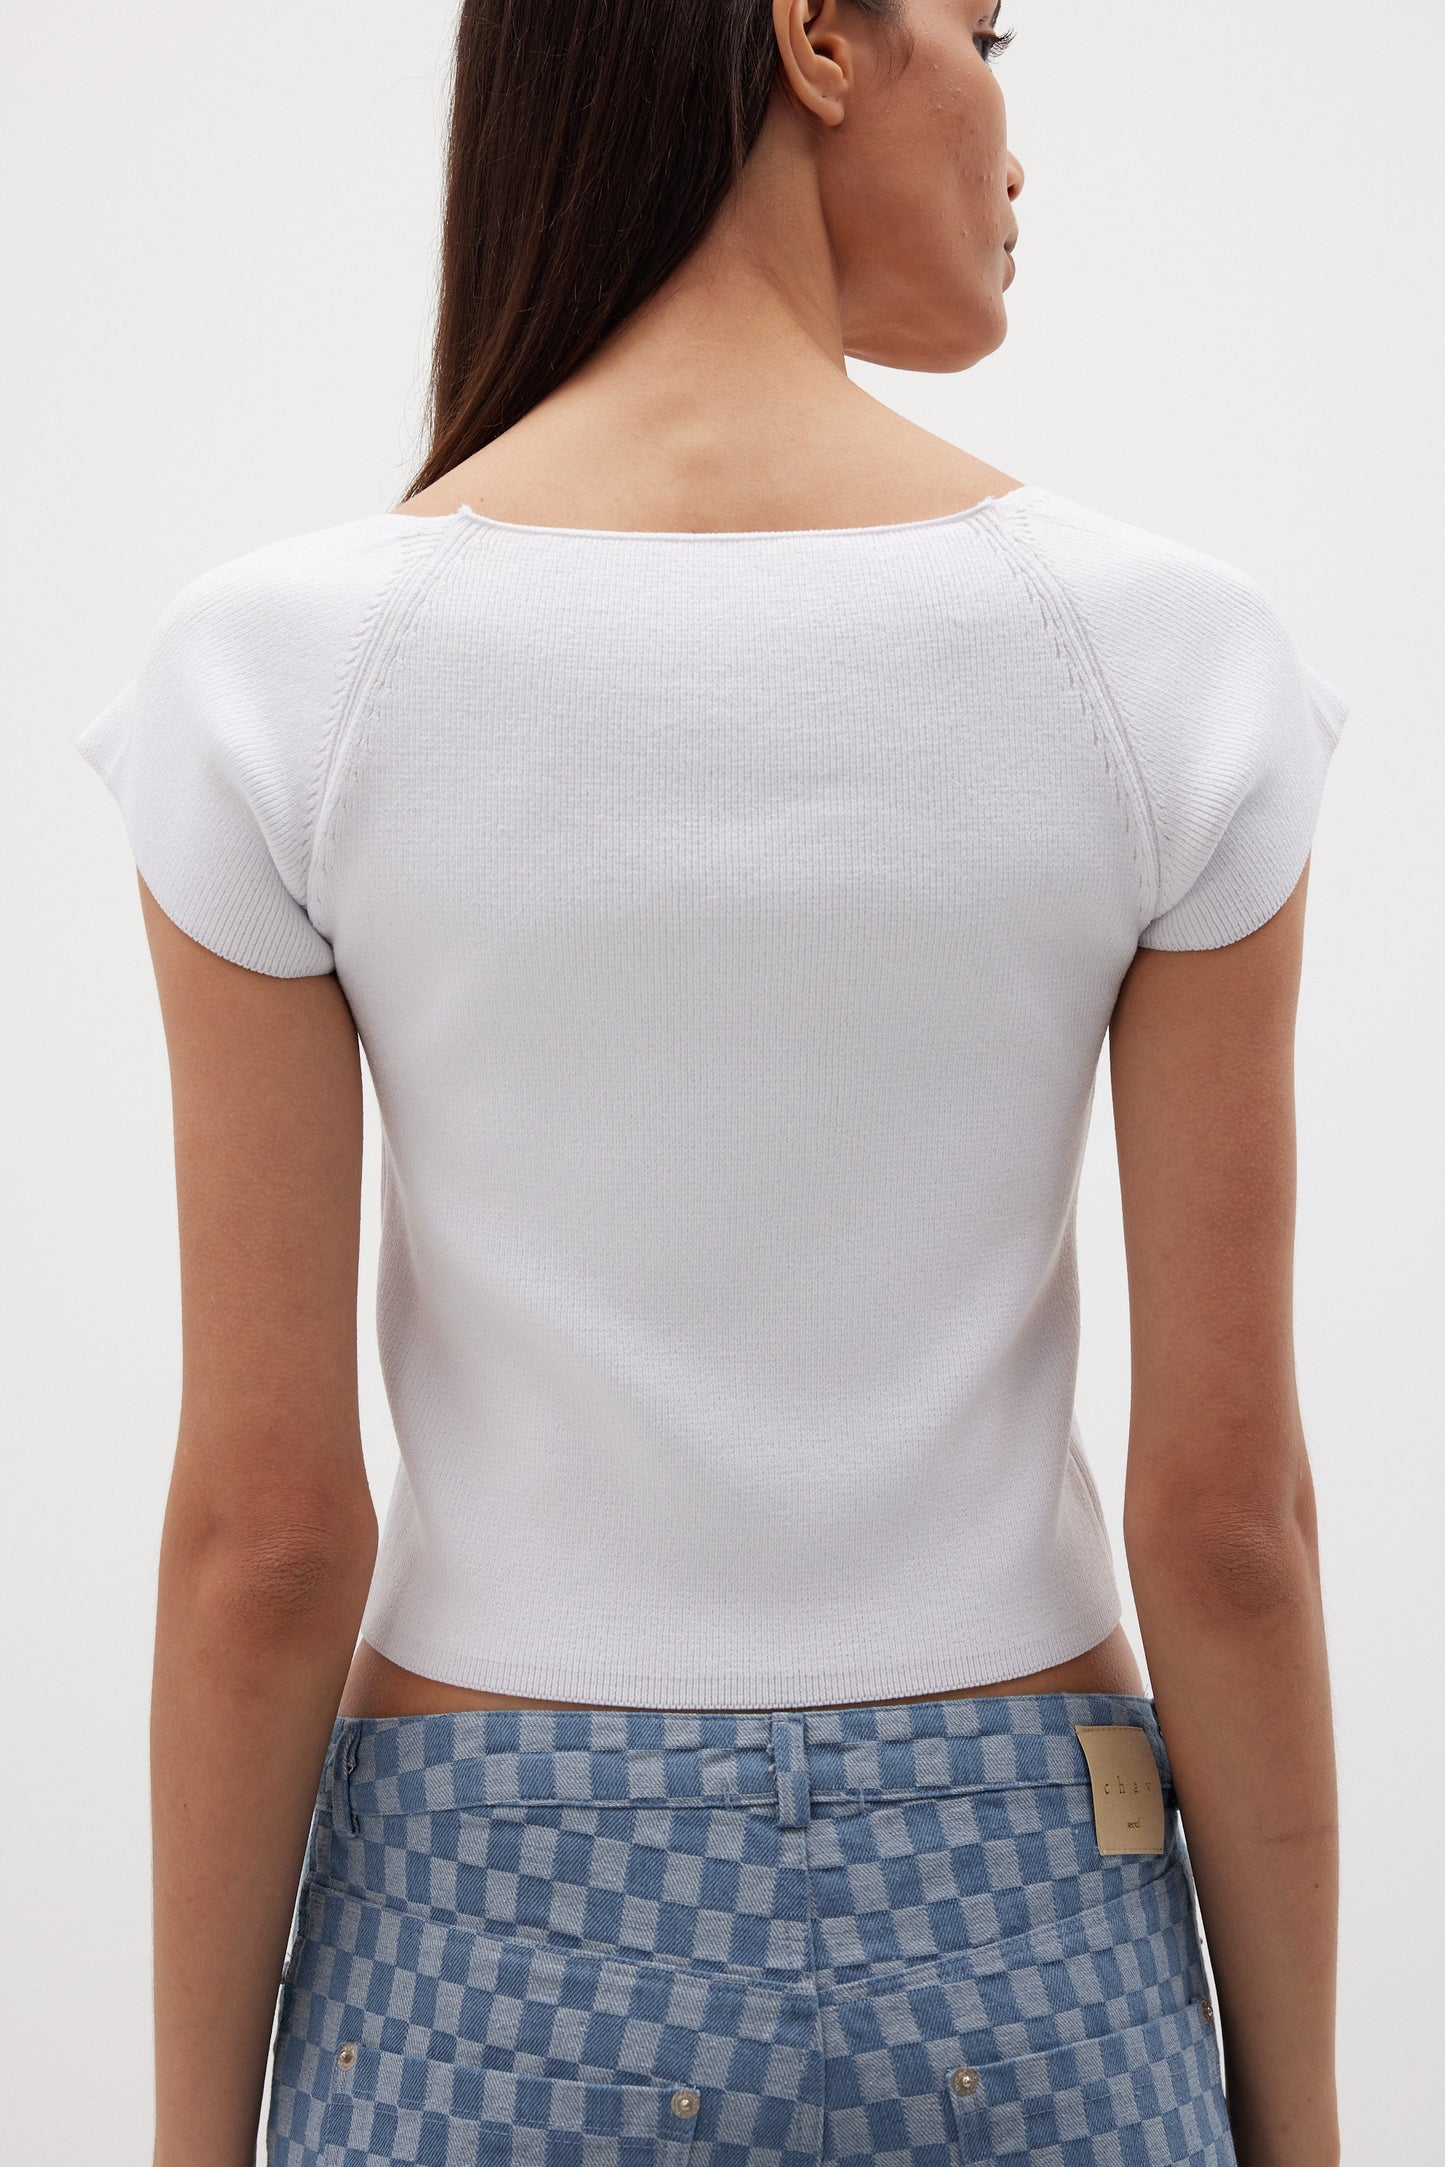 Suisen Knit Top, Daisy White